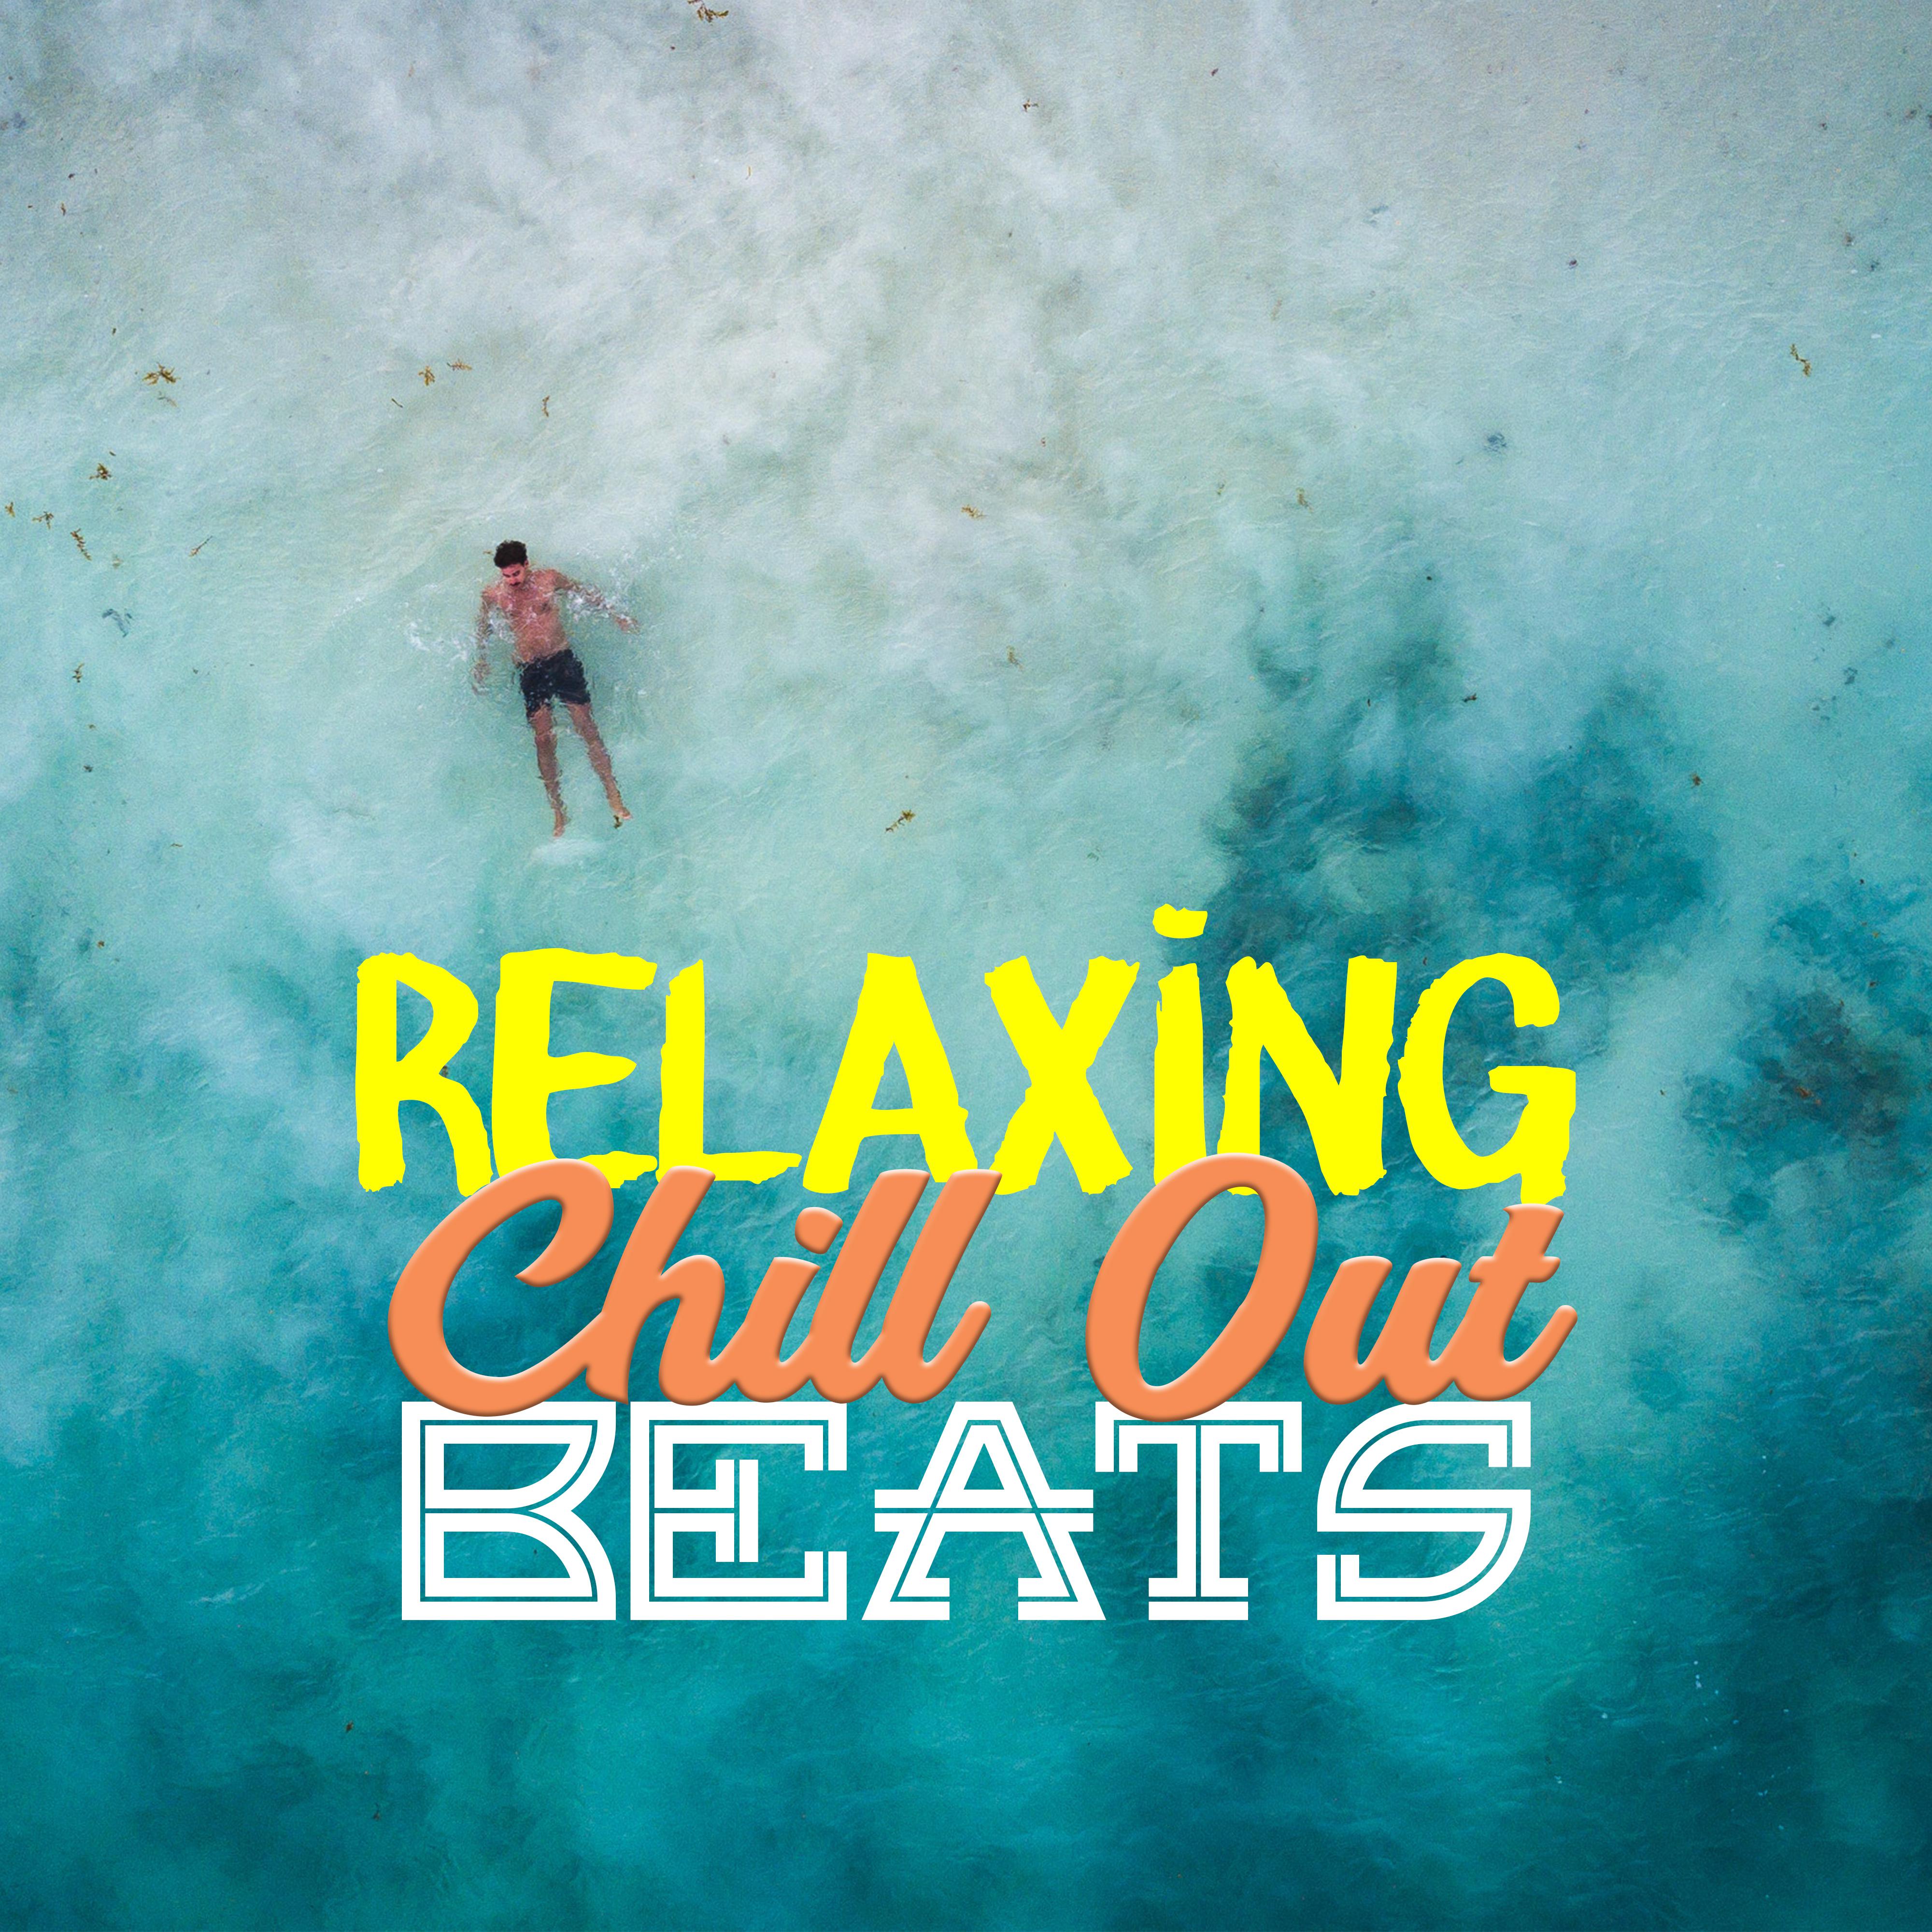 Relaxing Chill Out Beats – Summer Time to Rest, Chill Out Music, Beach Lounge, Inner Rest